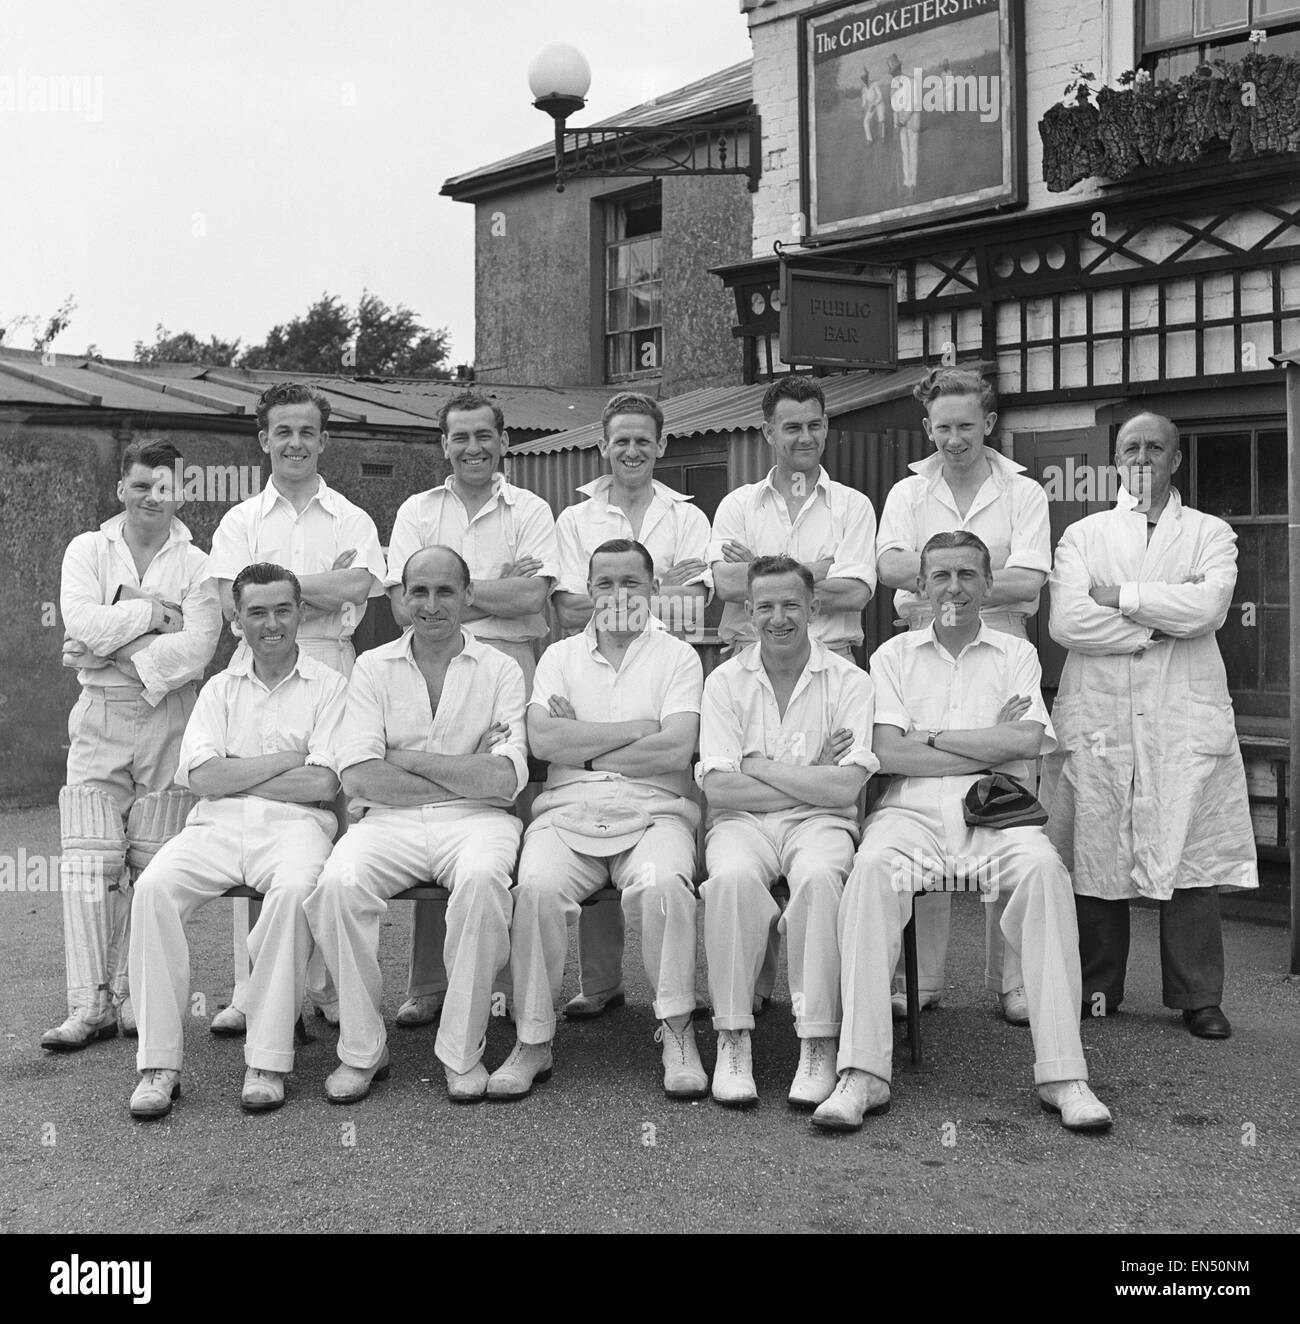 The local cricket team at Meopham one of the oldest teams in Kent seen here posing for a team picture outside The Cricketers public house Circa June 1950 Stock Photo